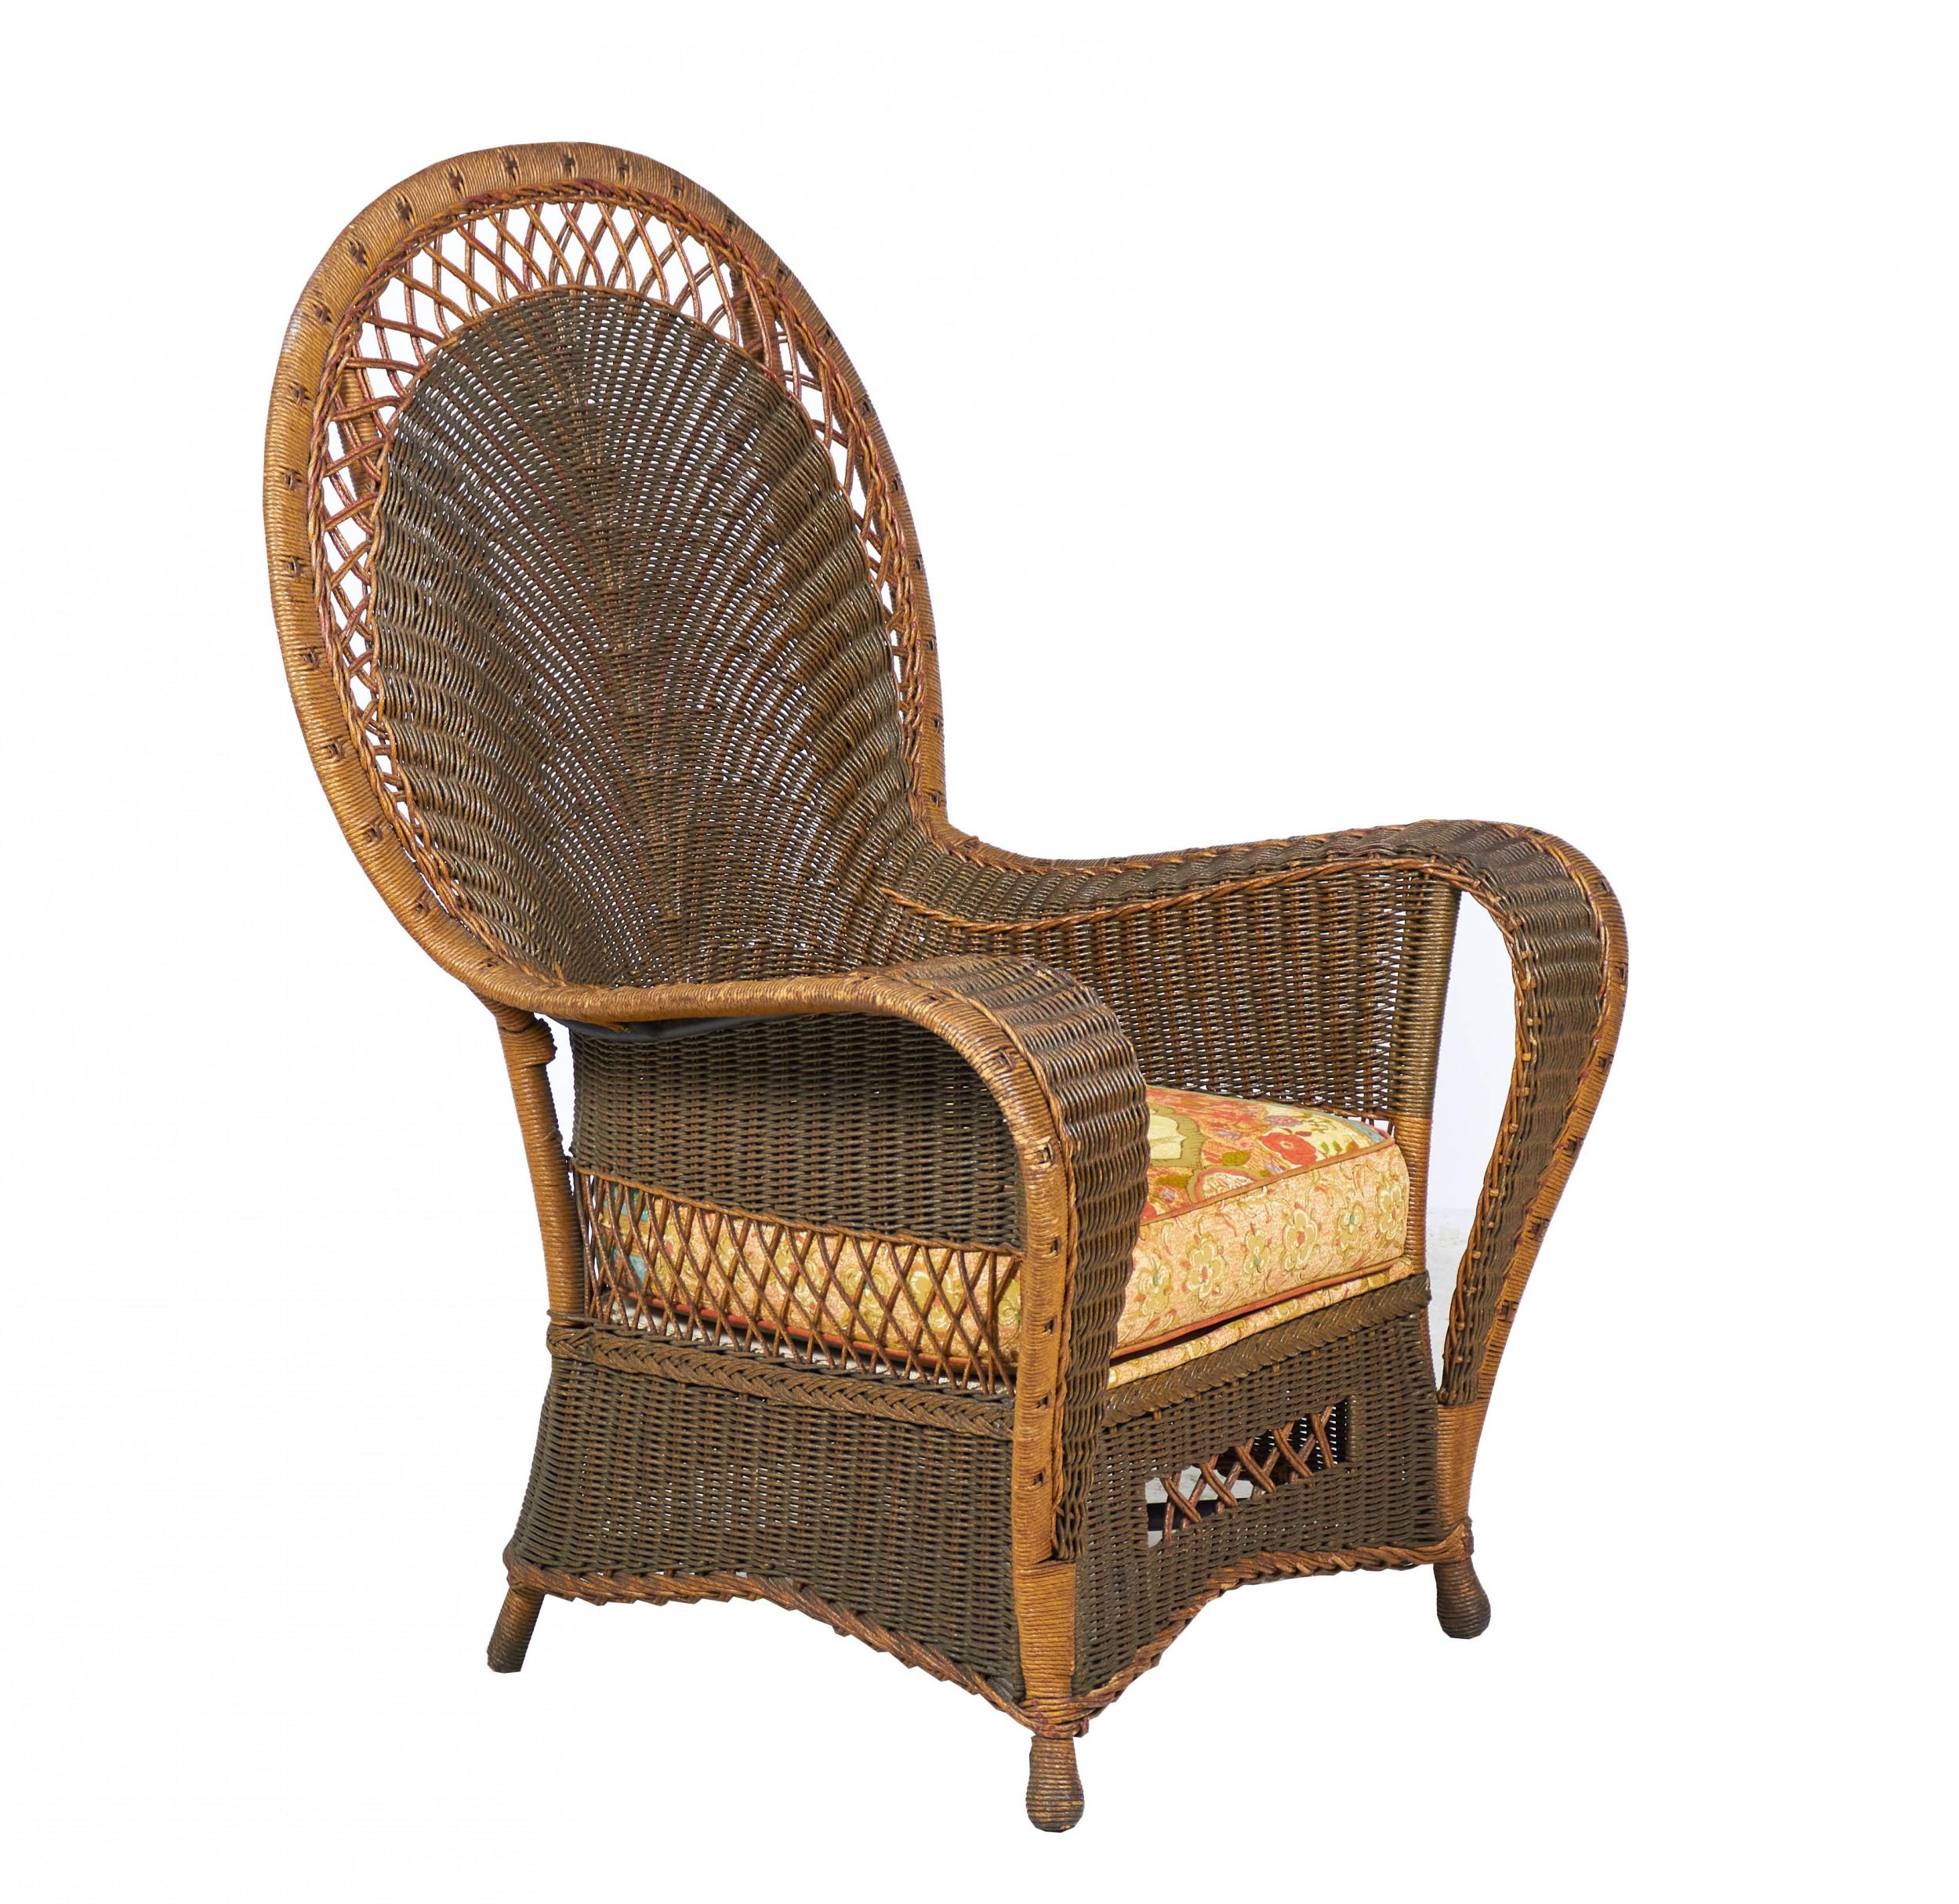 American Art Deco 3-piece wicker salon set comprised of a settee, a large pointed fan-back armchair, and a smaller fan back armchair all with a filigree border and curved & tapered arms, resting on wicker wrapped ball feet with fabric seat cushions